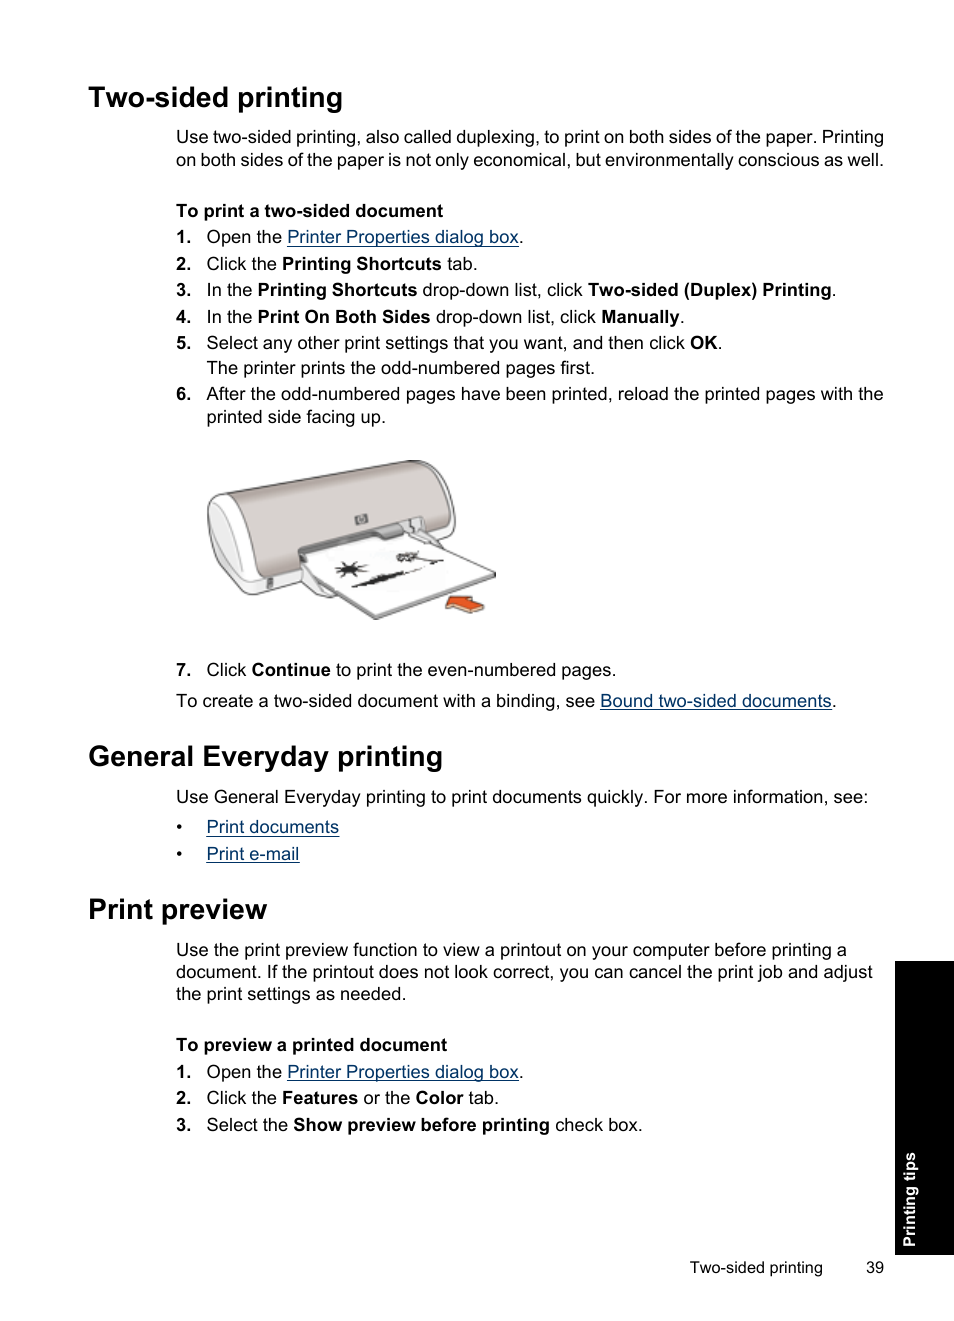 printing double sided manually in preview